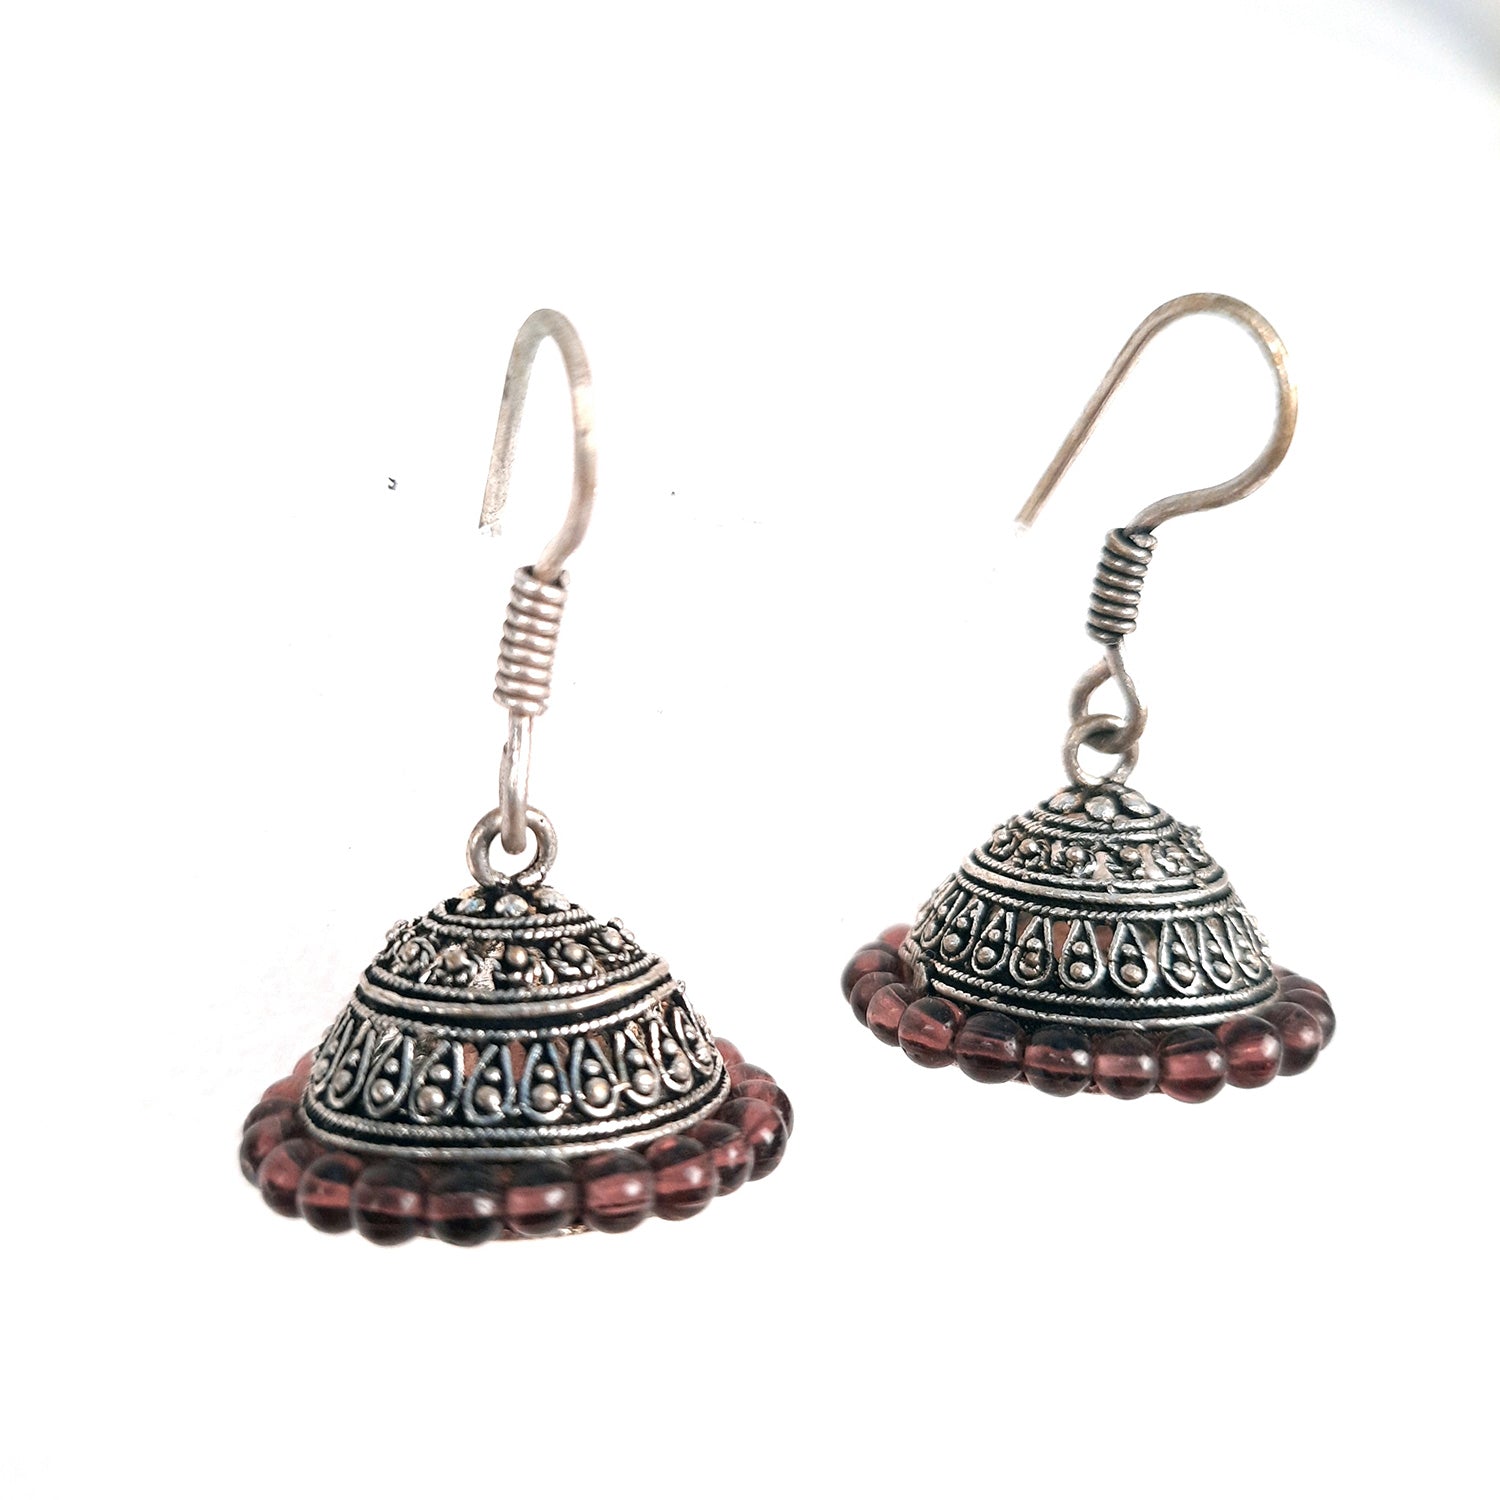 Oxidised Silver Plated Jhumka earrings for Girls and Women | Latest Stylish Fashion Jewellery | Gifts for Her, Friendship Day, Valentine's Day Gift - Apkamart